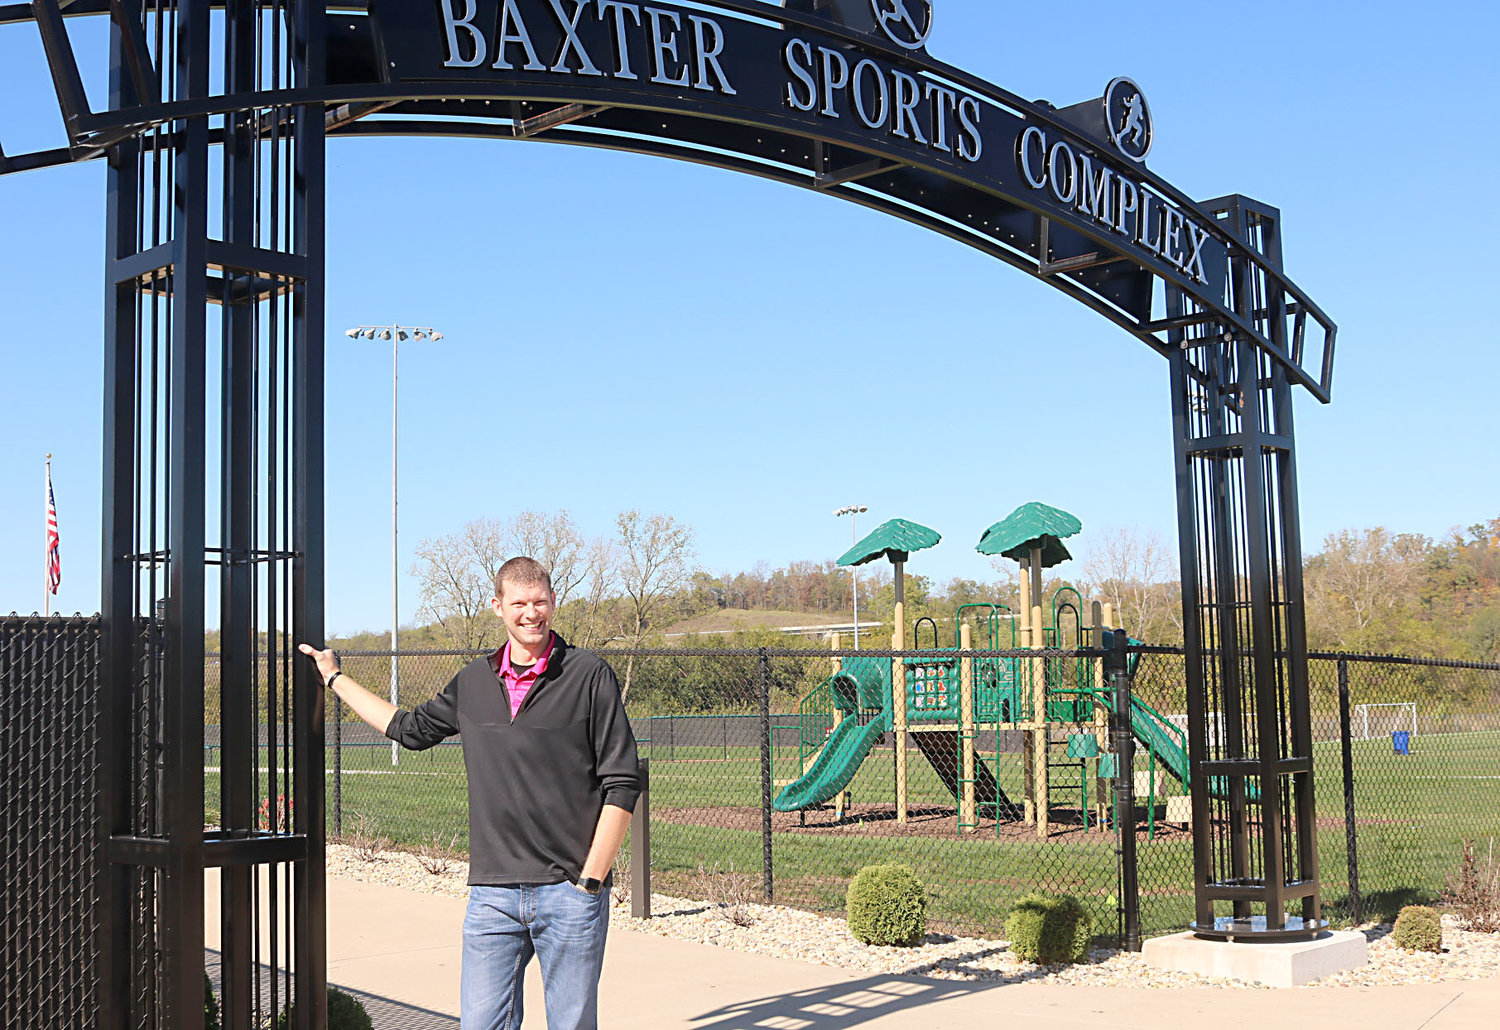 Current Baxter Sports Complex Executive Director Jeff Woodside has announced his resignation from the organization. The complex board will start searching for his replacement immediately.